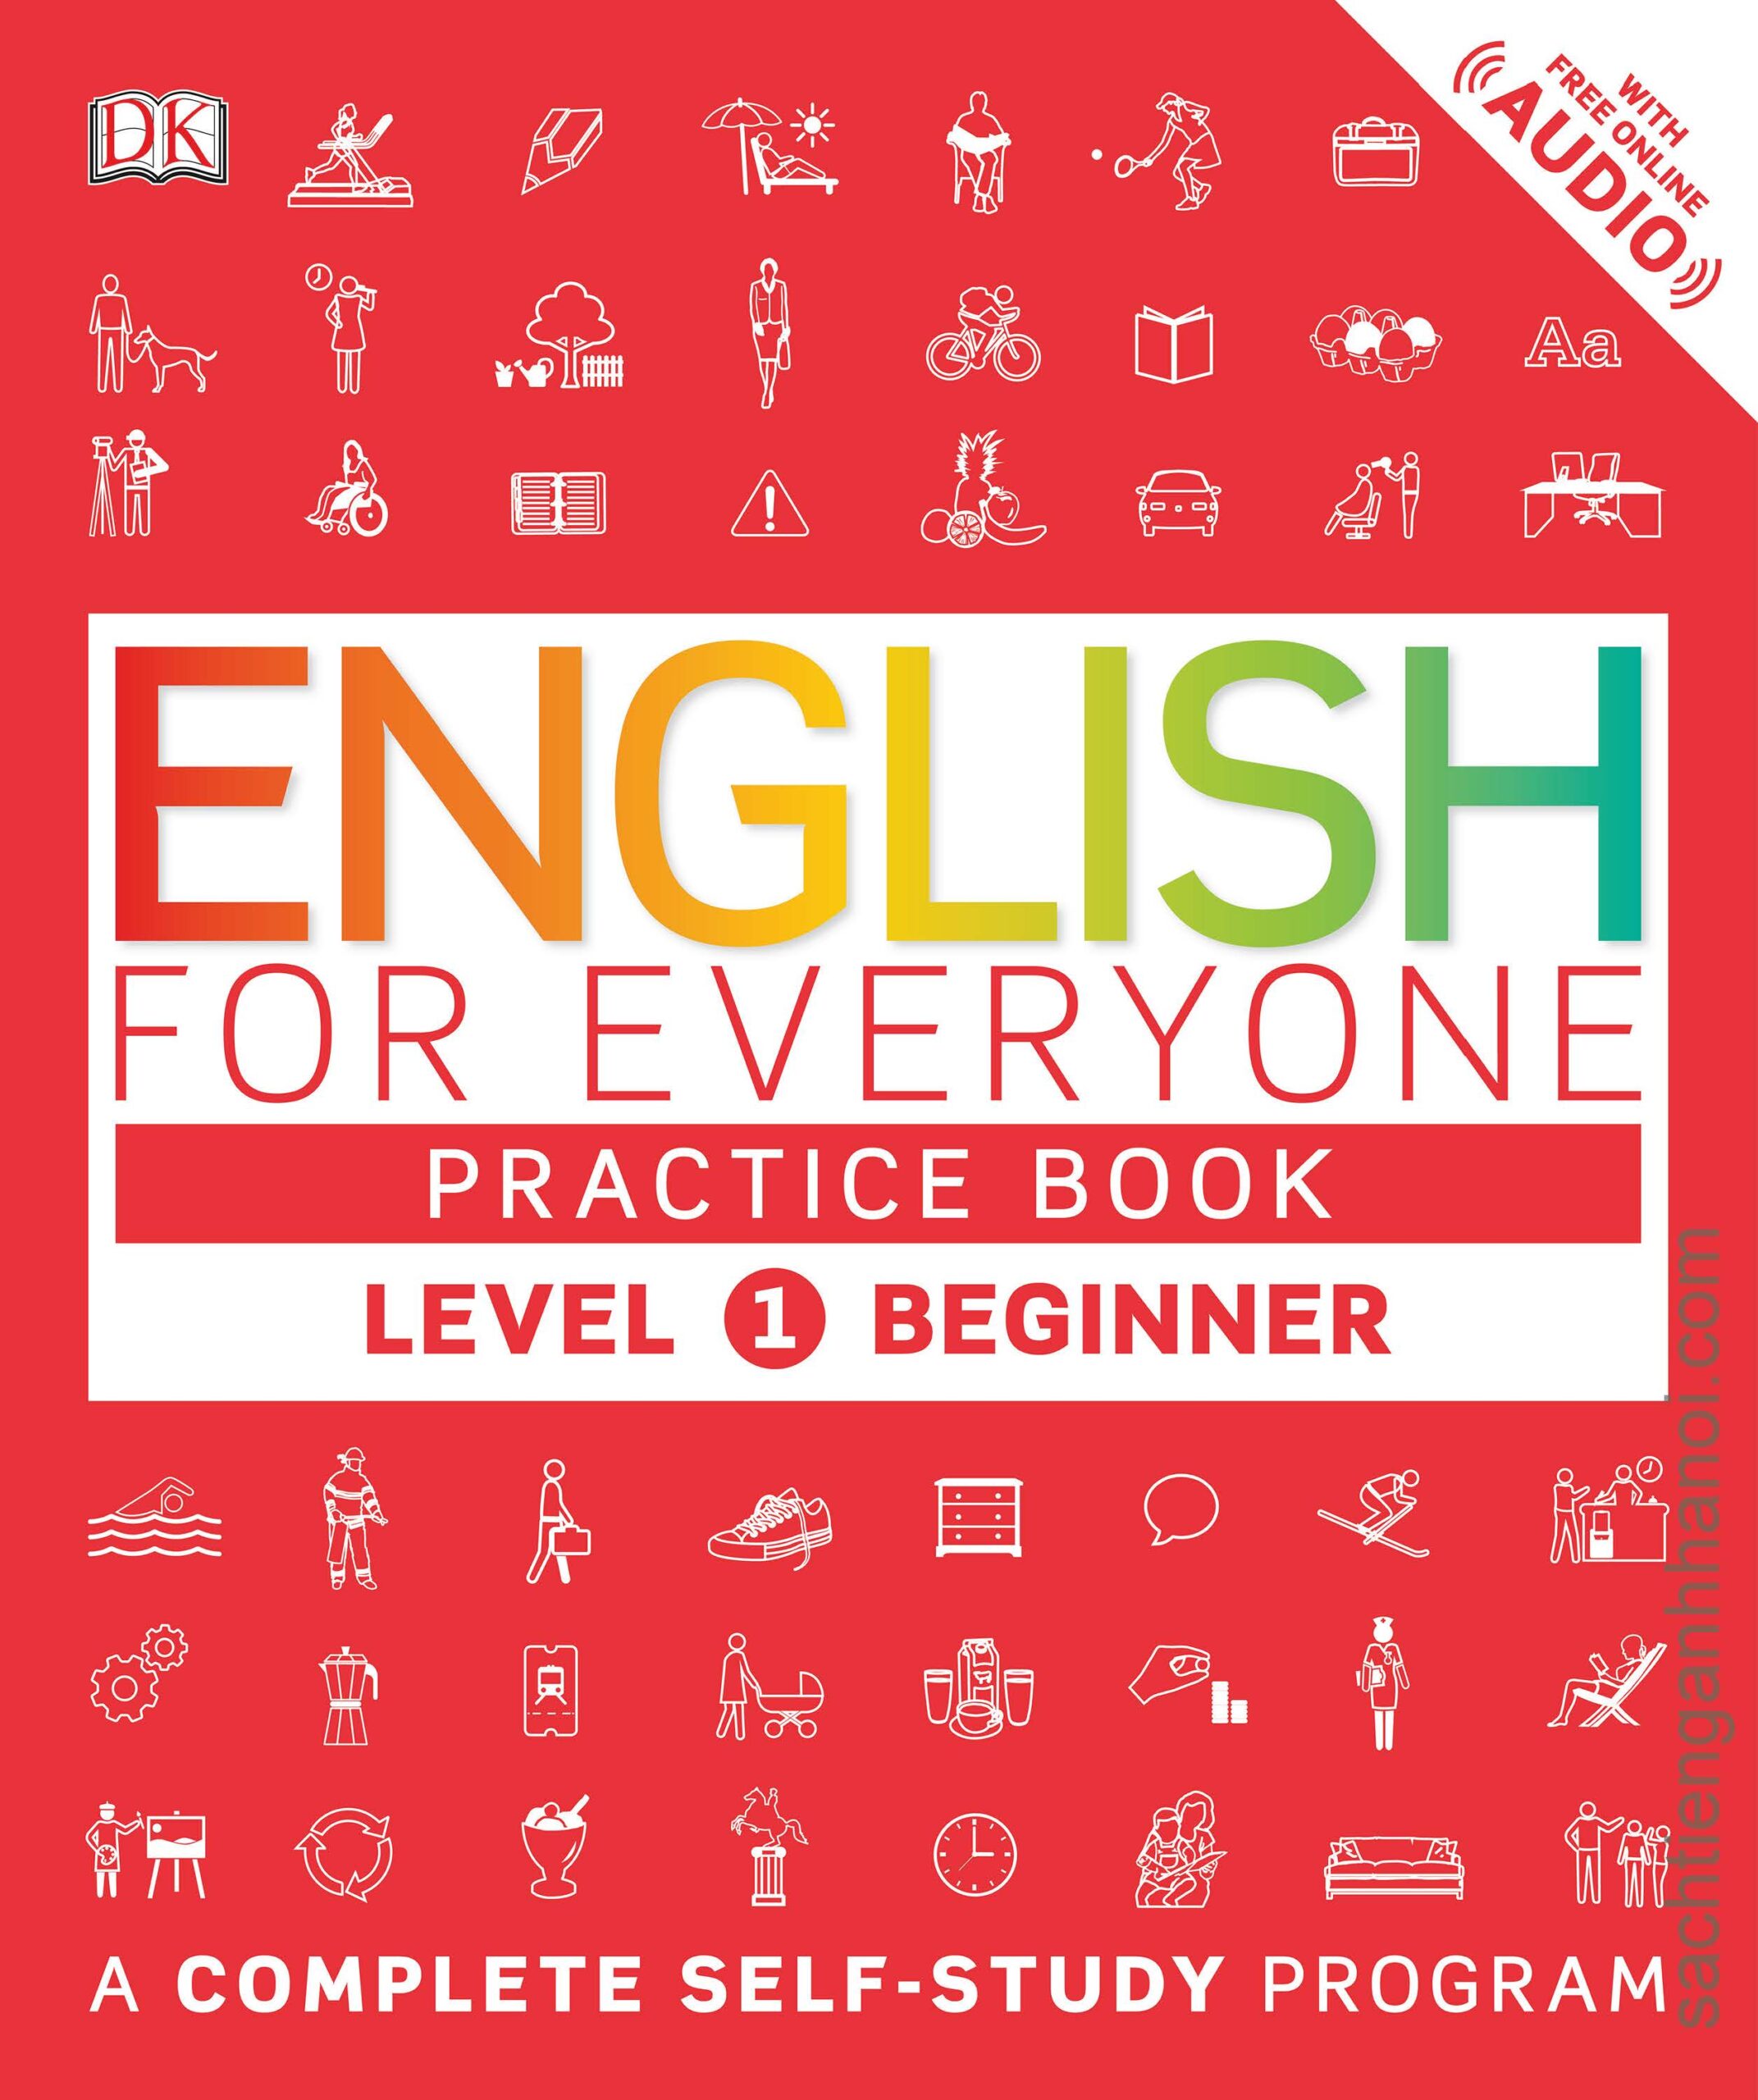 audio-dk-english-for-everyone-level-1-beginner-practice-book-s-ch